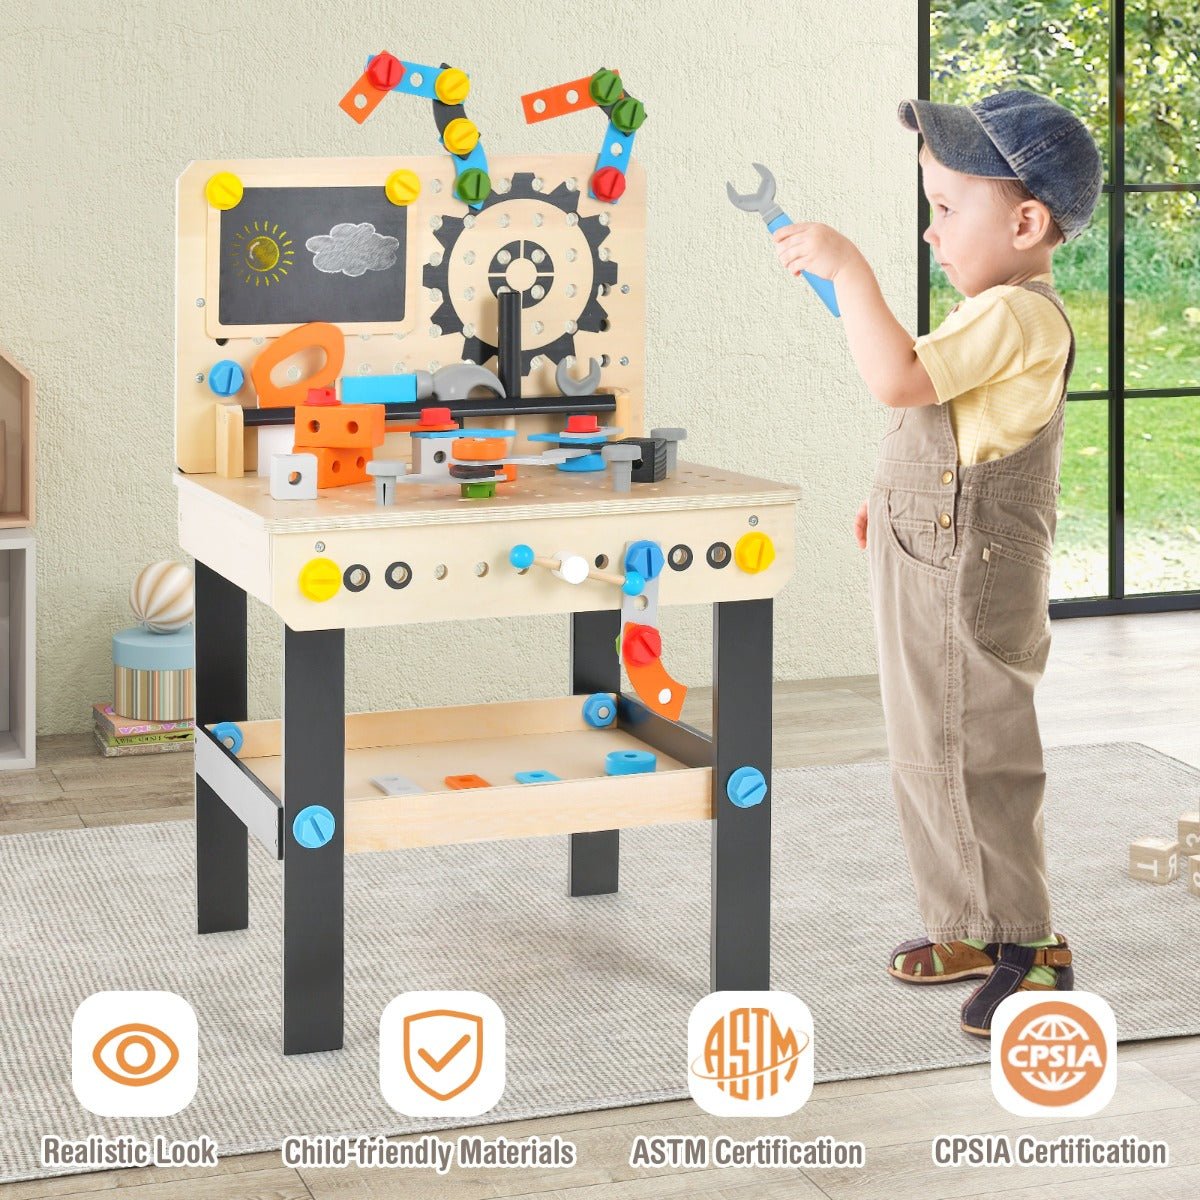 Build, Create, and Explore with Our Workbench Playset